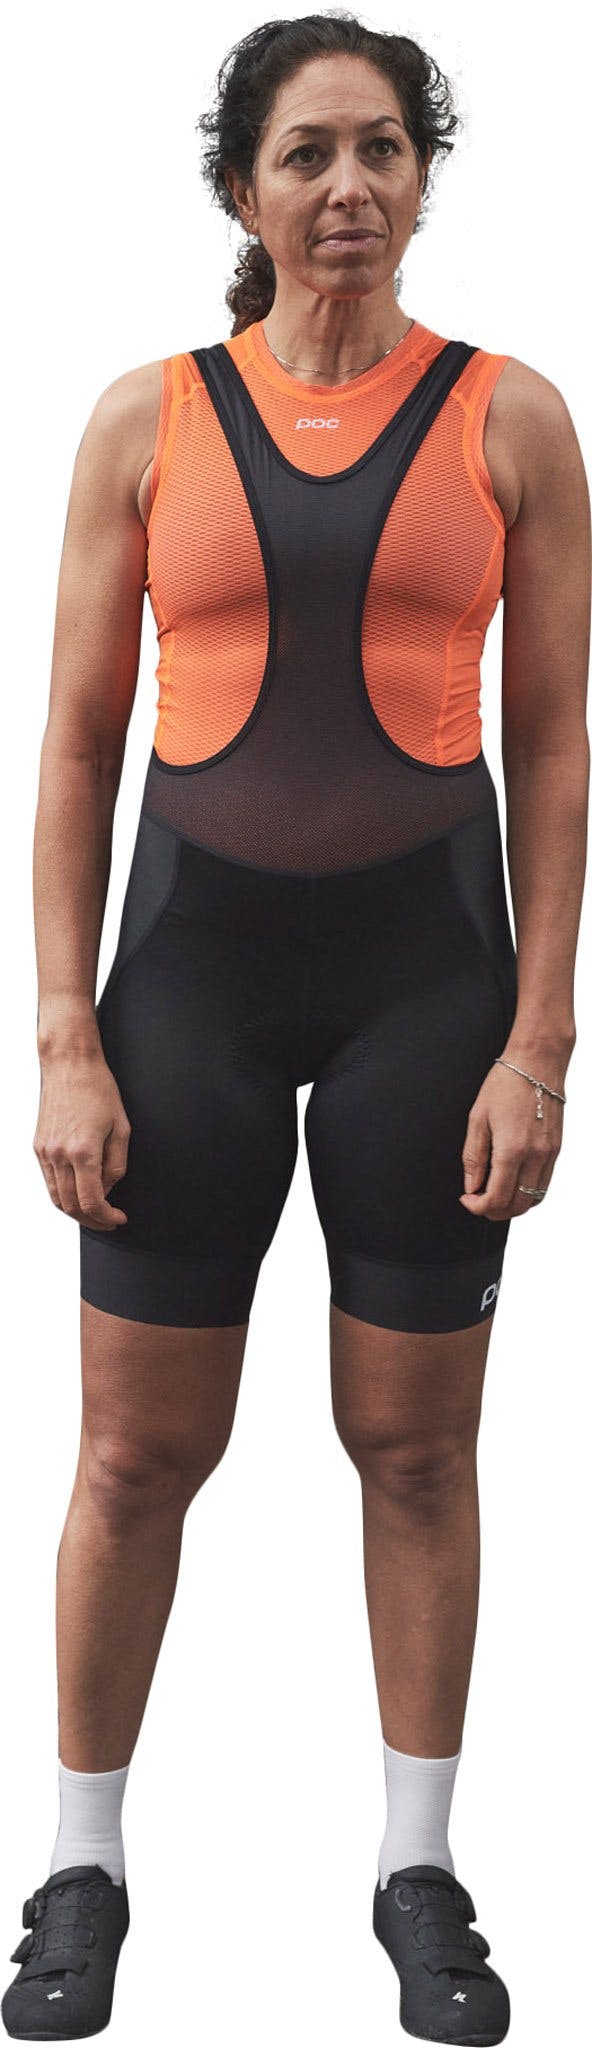 Product image for Pure Vpds Bib Shorts - Women's